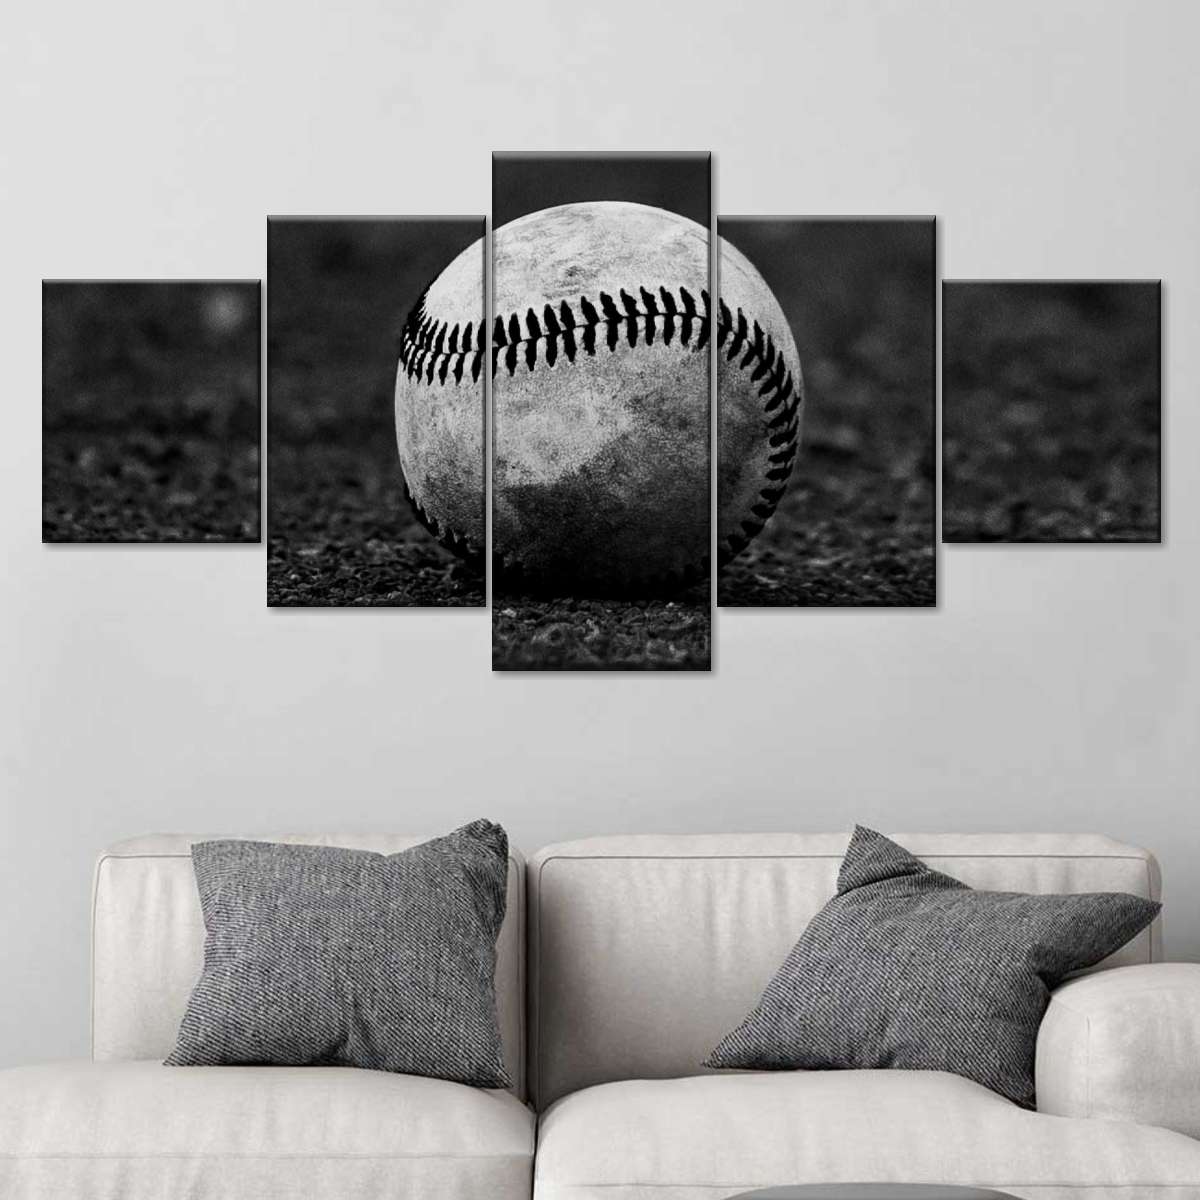  TUMOVO Black and White Wall Art American Baseball Team Cubs  Paintings Sports Pictures Giclee Artwork Home Decor for Living Room Framed  Gallery-Wrapped Ready to Hang Posters, 42 Wx28 H: Posters 